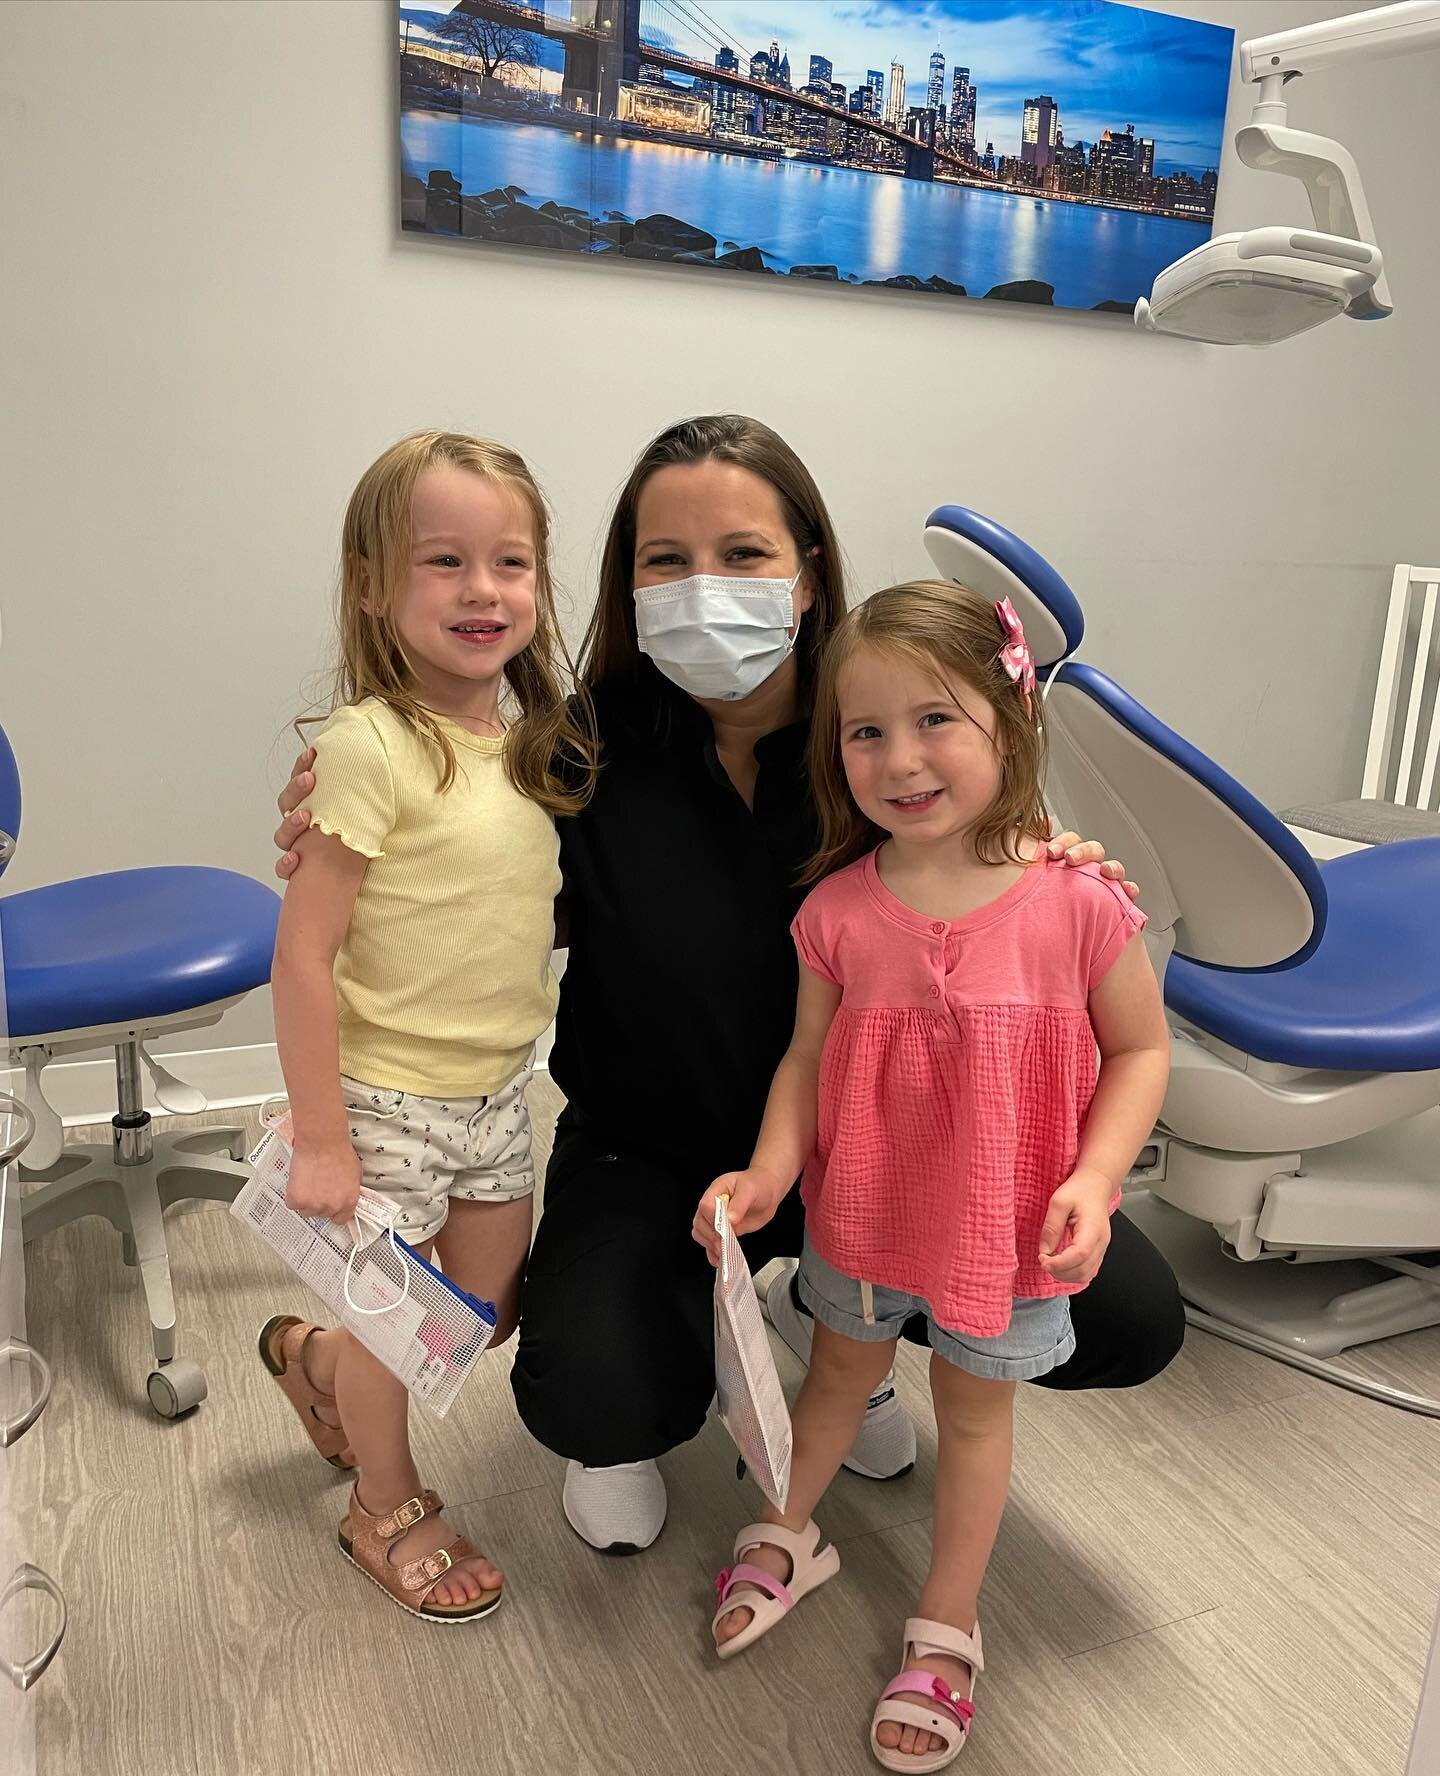 We have the sweetest patients!! #nutleypediatricdentistry #npd #dochollywood #hollywoodsmiles #hollywoodstars @julgolia